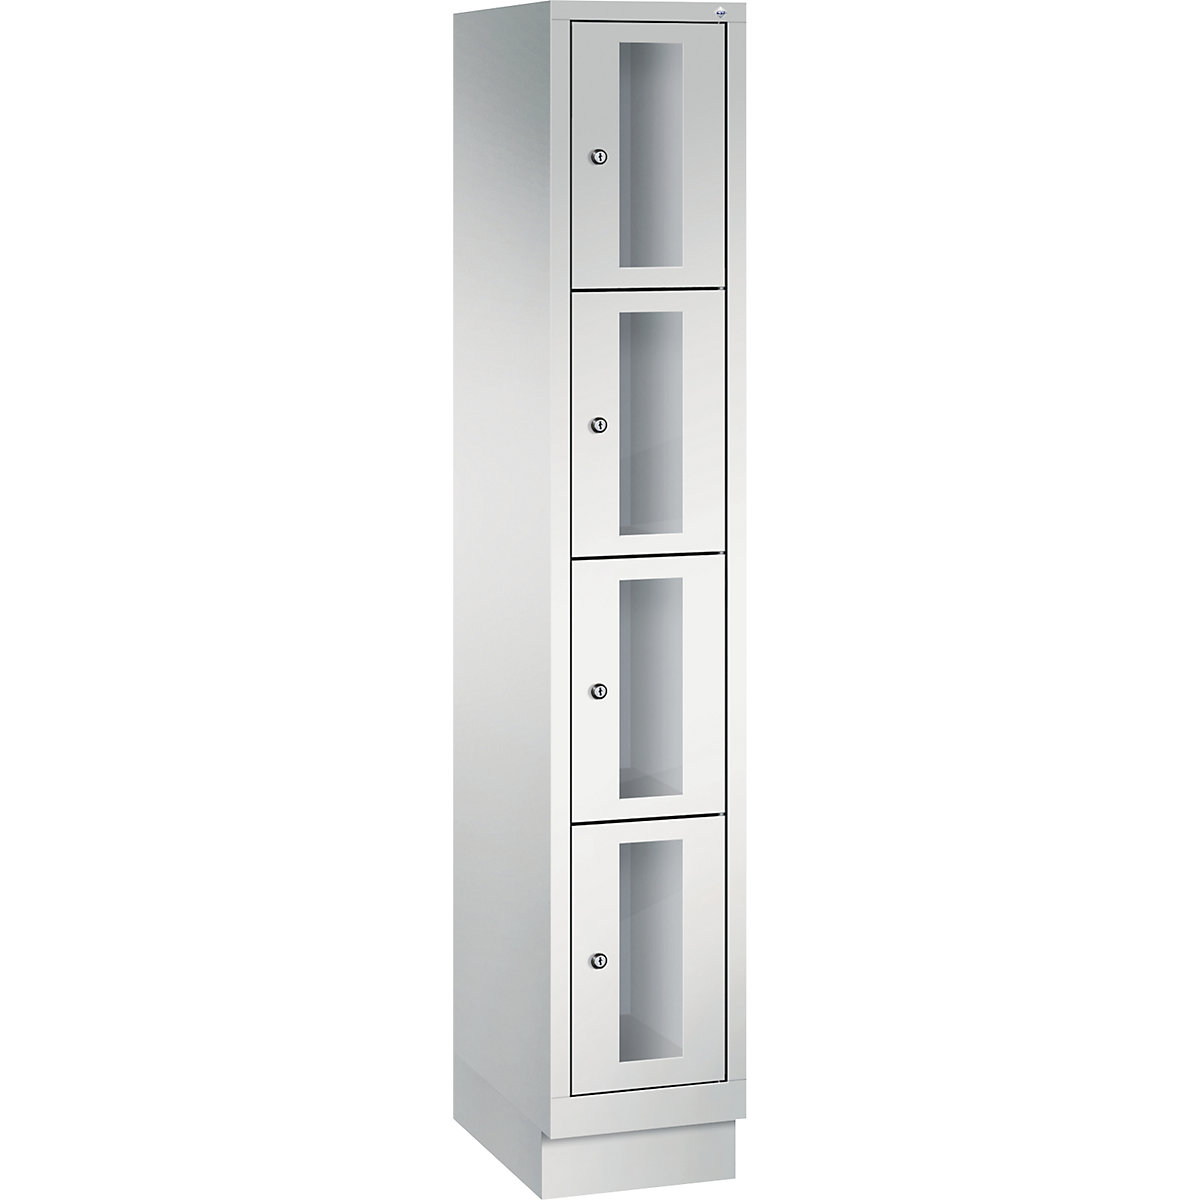 C+P – CLASSIC locker unit, compartment height 375 mm, with plinth, 4 compartments, width 320 mm, light grey door